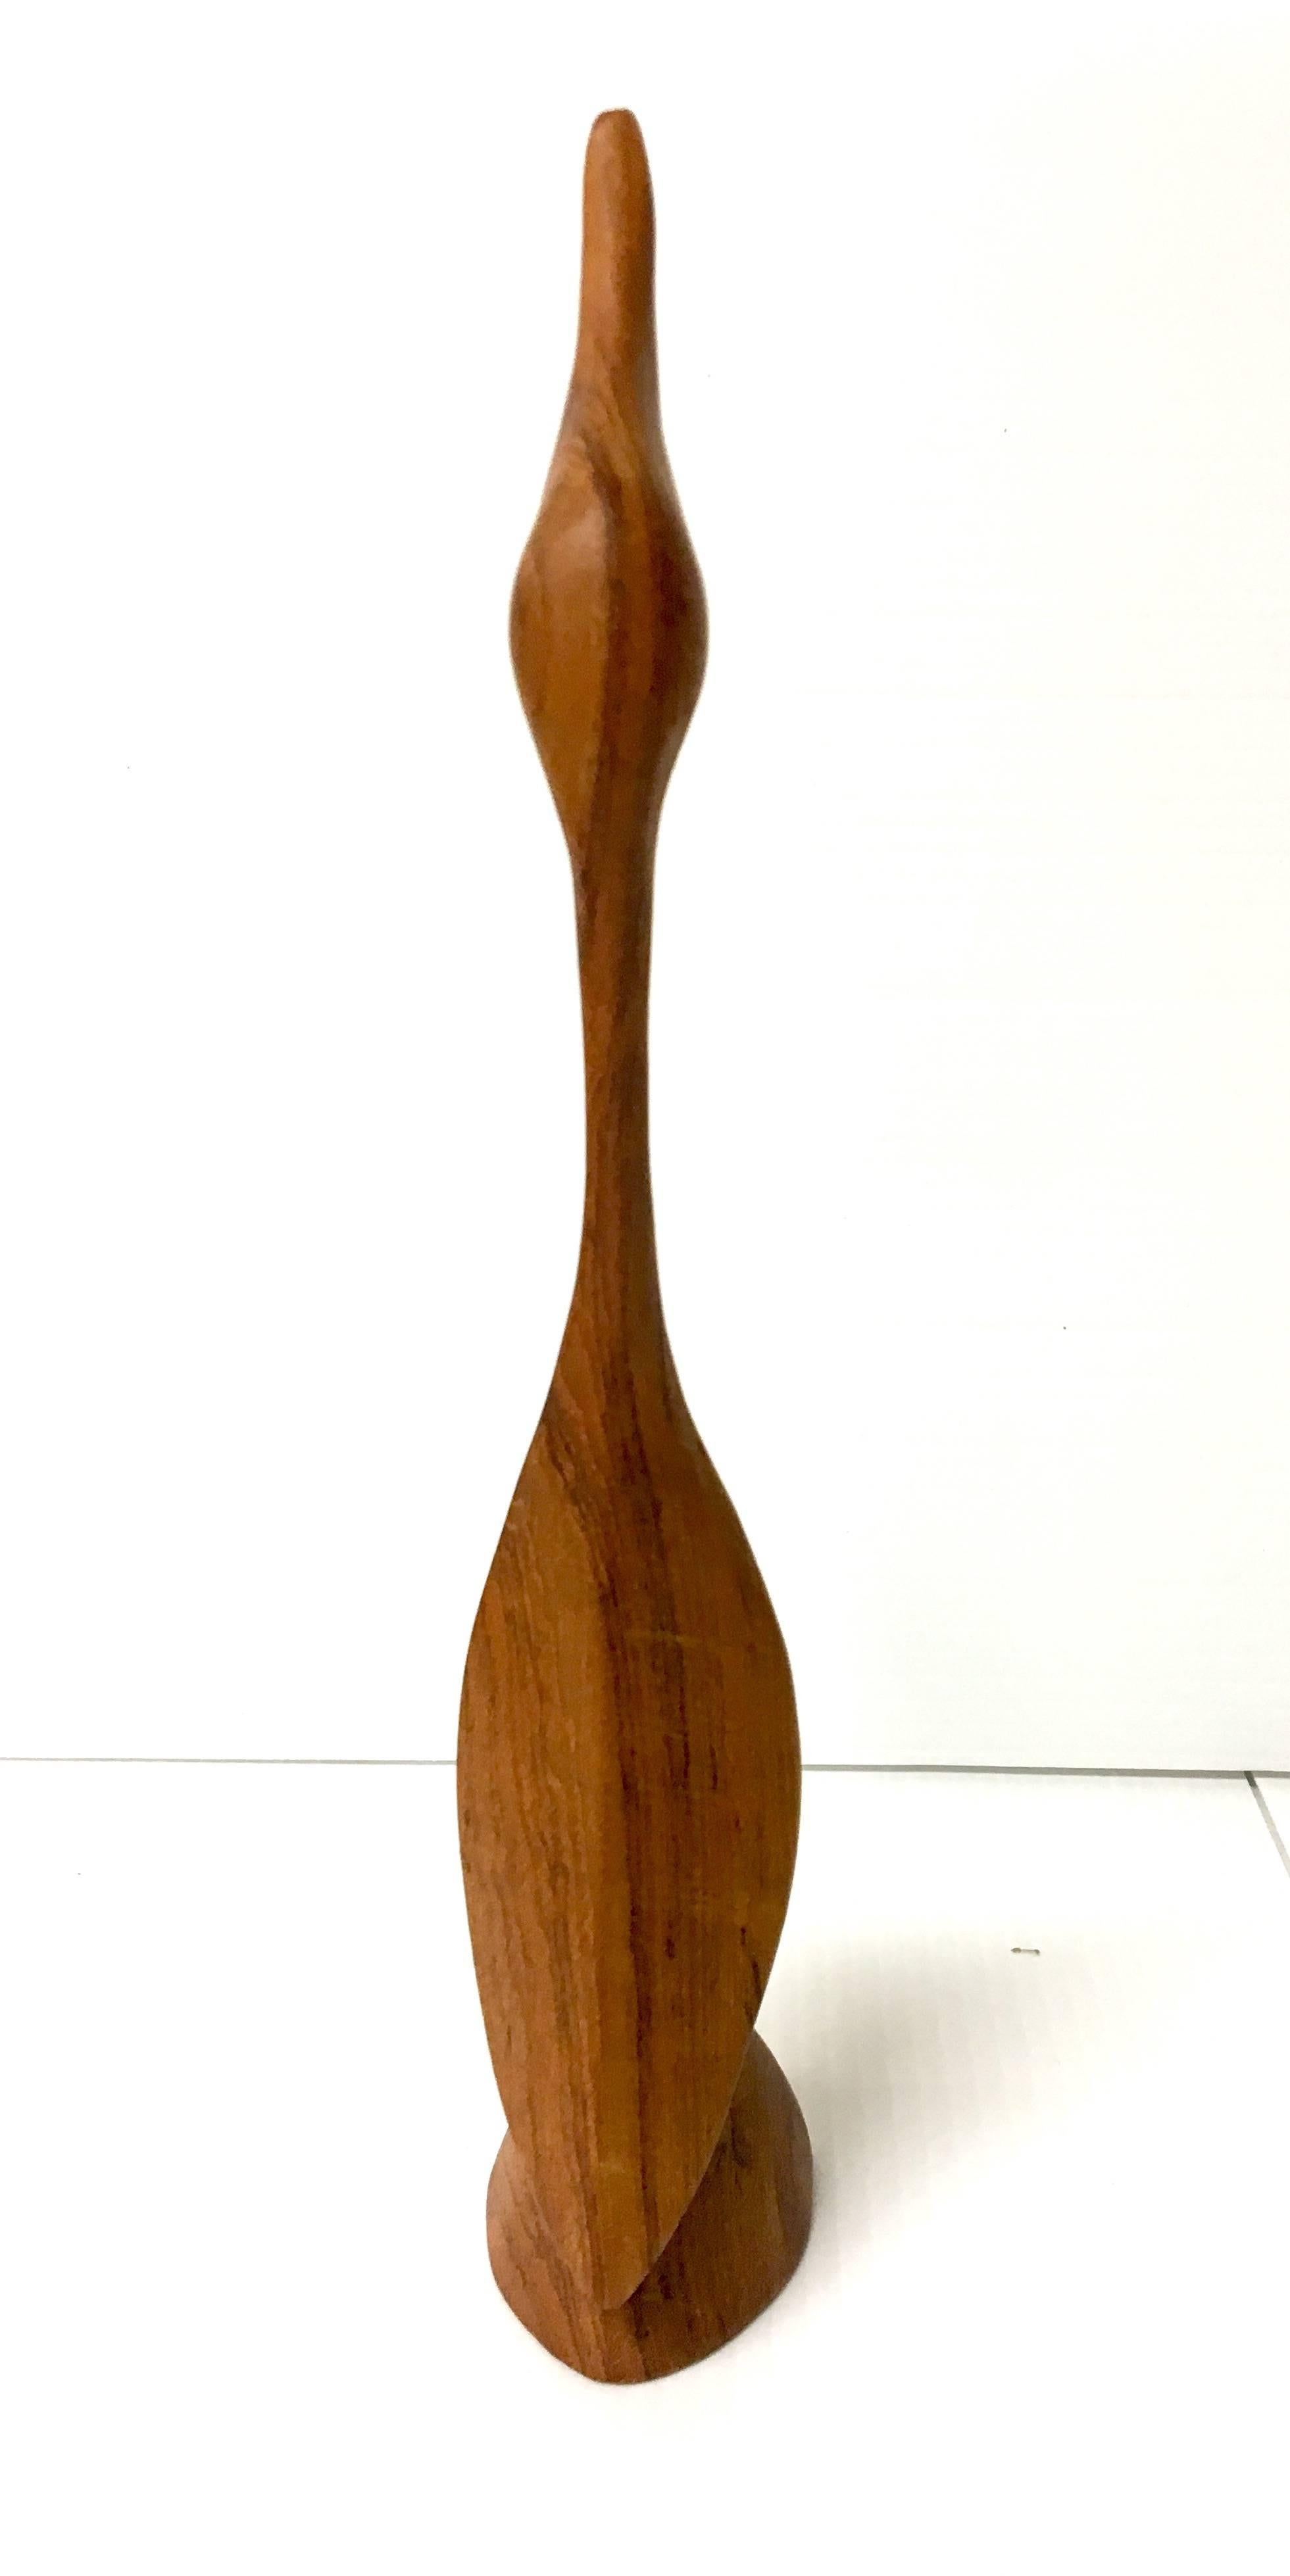 Whimsical hand-carved duck sculpture in solid teak unsigned, circa 1960s.